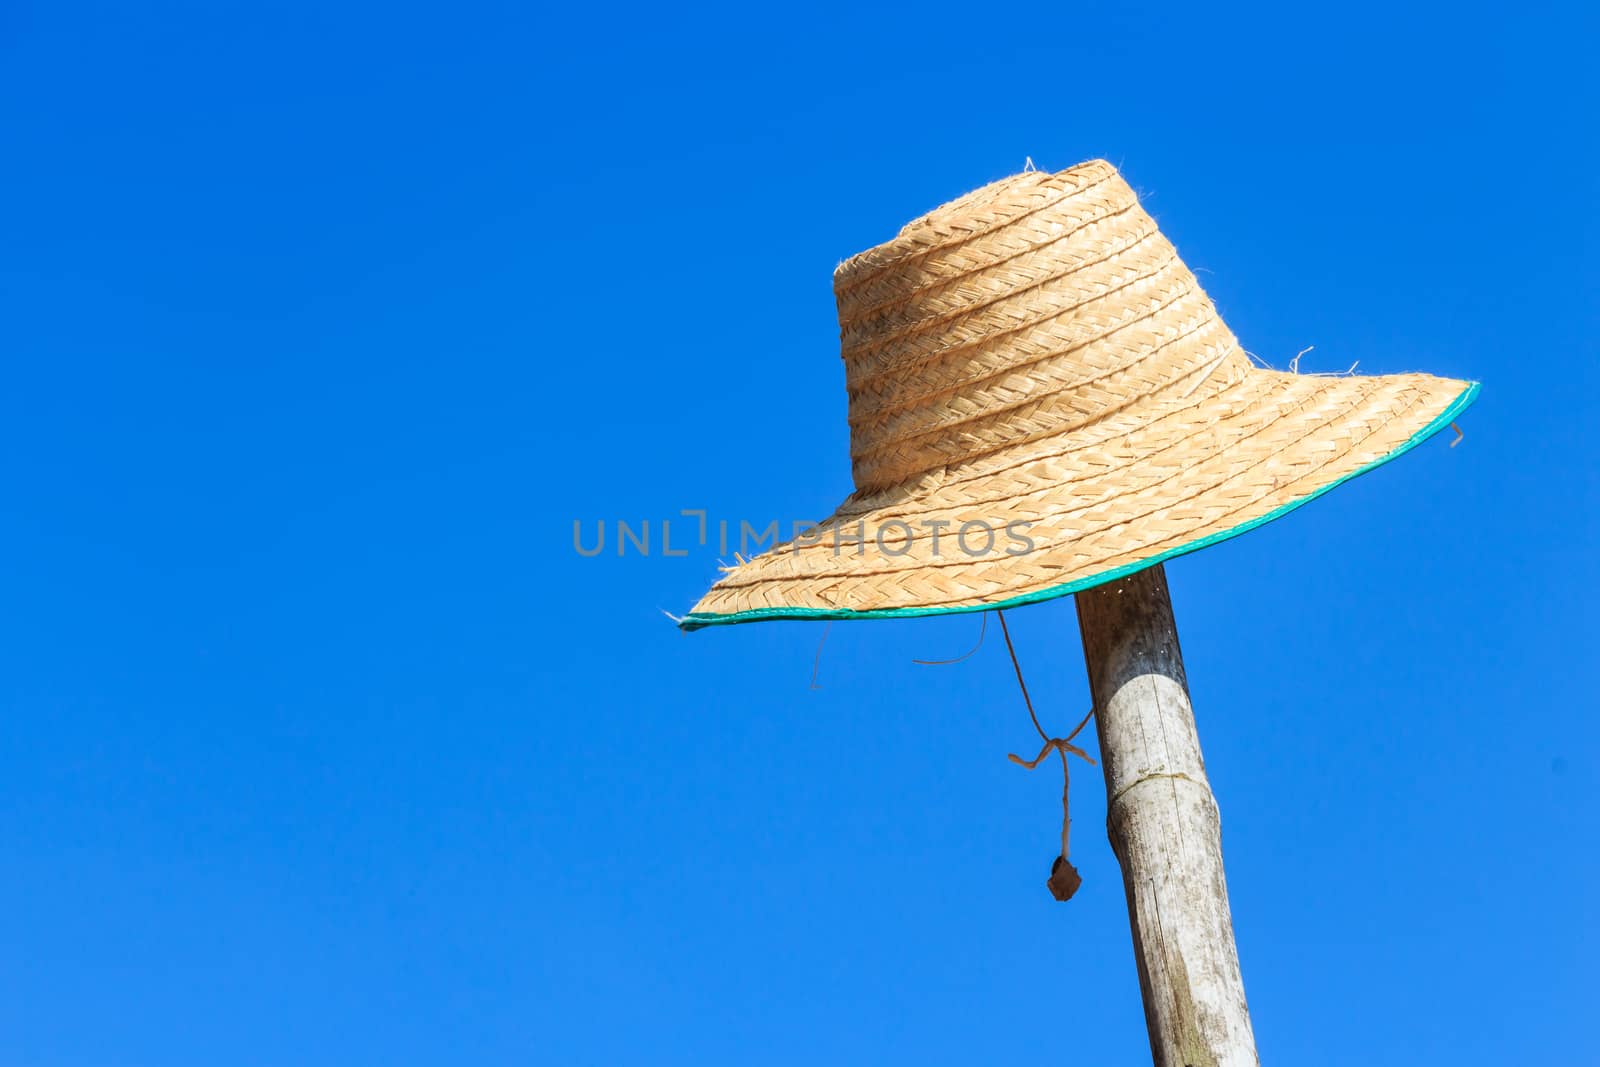 farmer's hat was hanged on bamboo and blue sky in rural ,Thailand